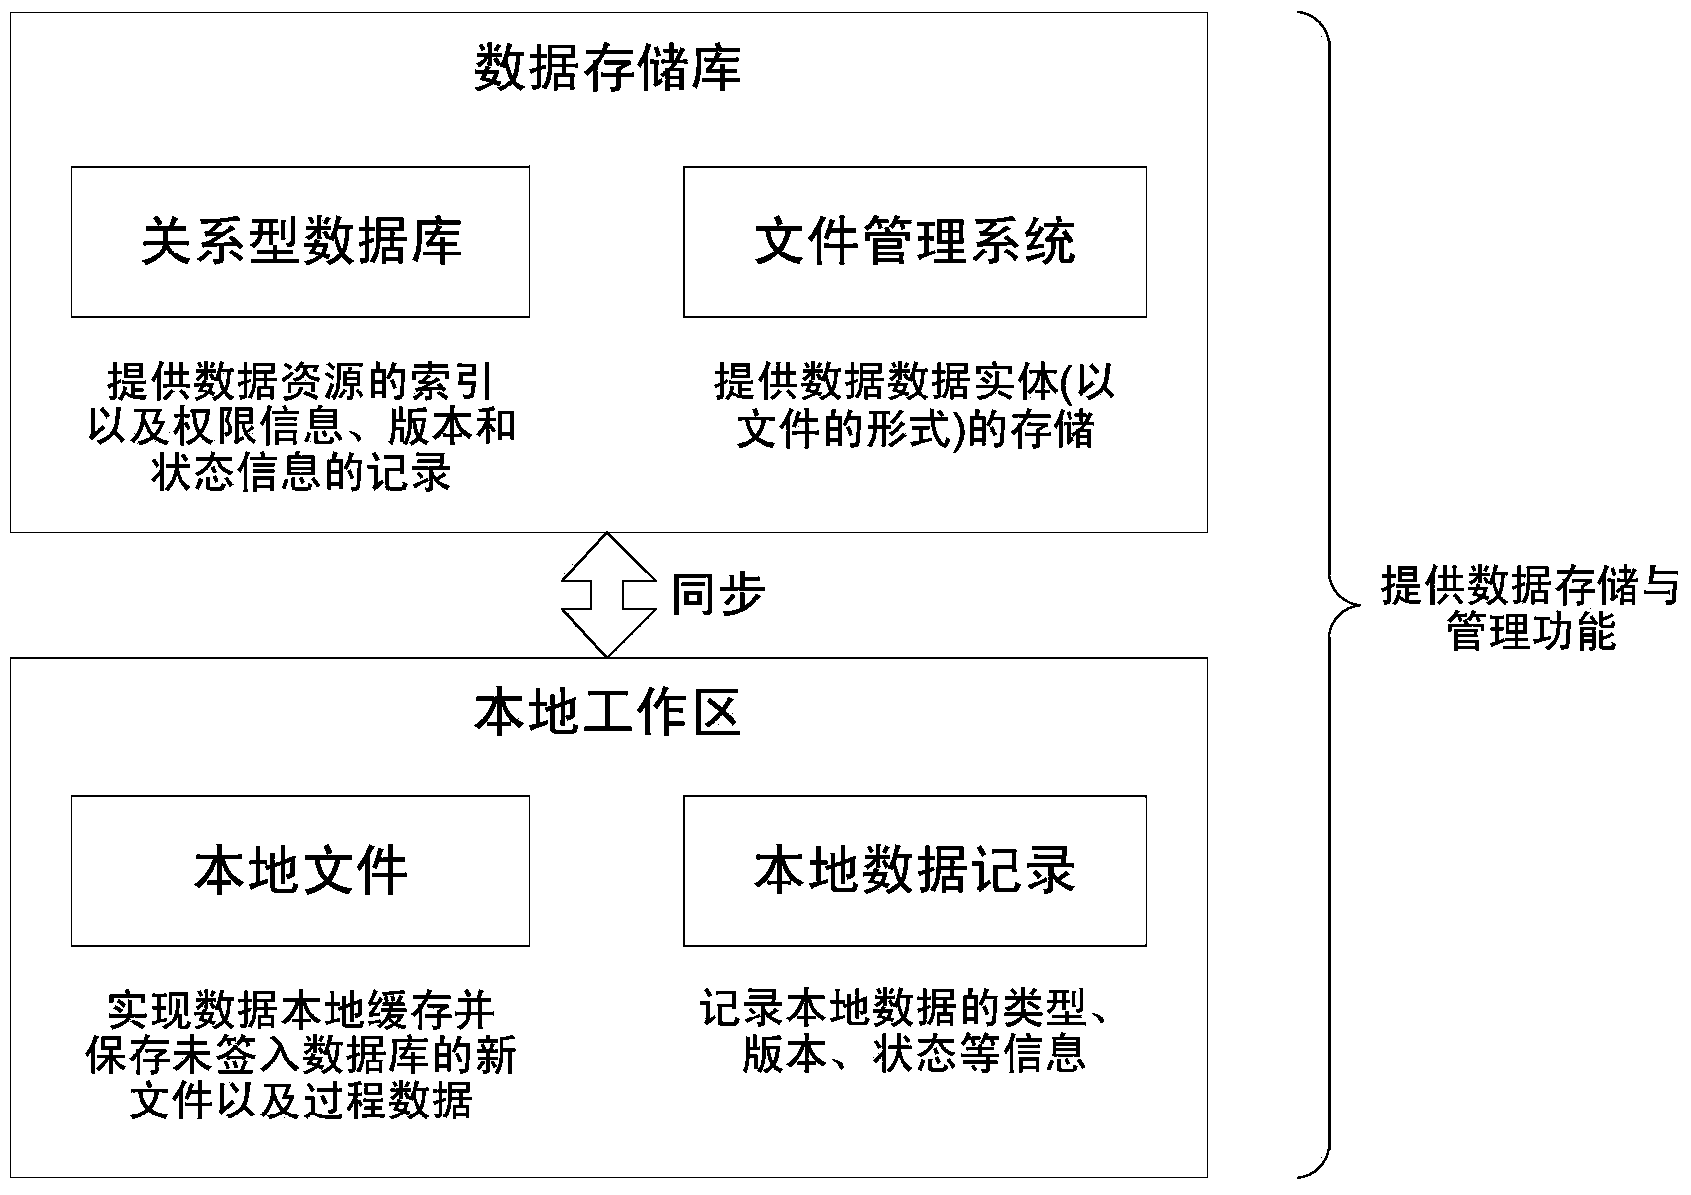 Efficient software data management method combining local working area with remote data server